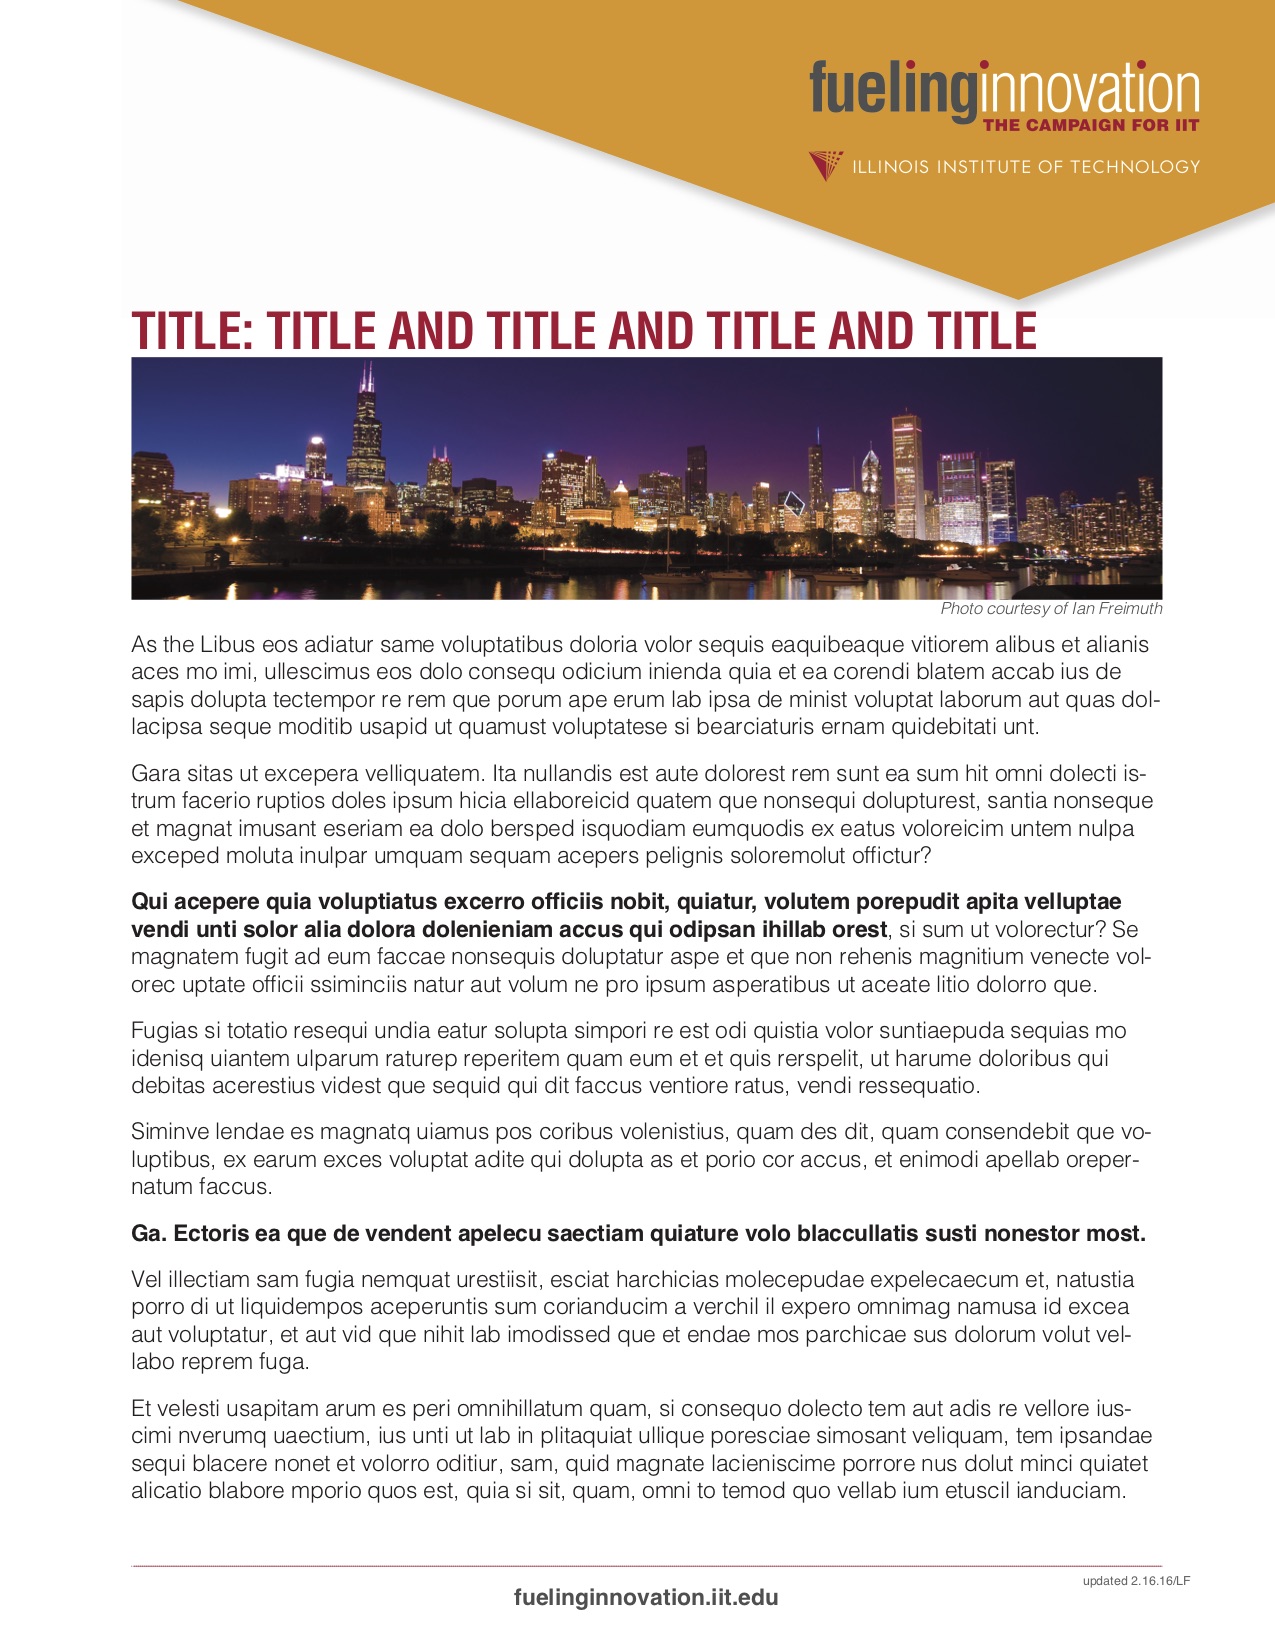 JPEG image of new Illinois Tech one-pager using panoramic picture that recalls web styles, in particular social media banner styles.